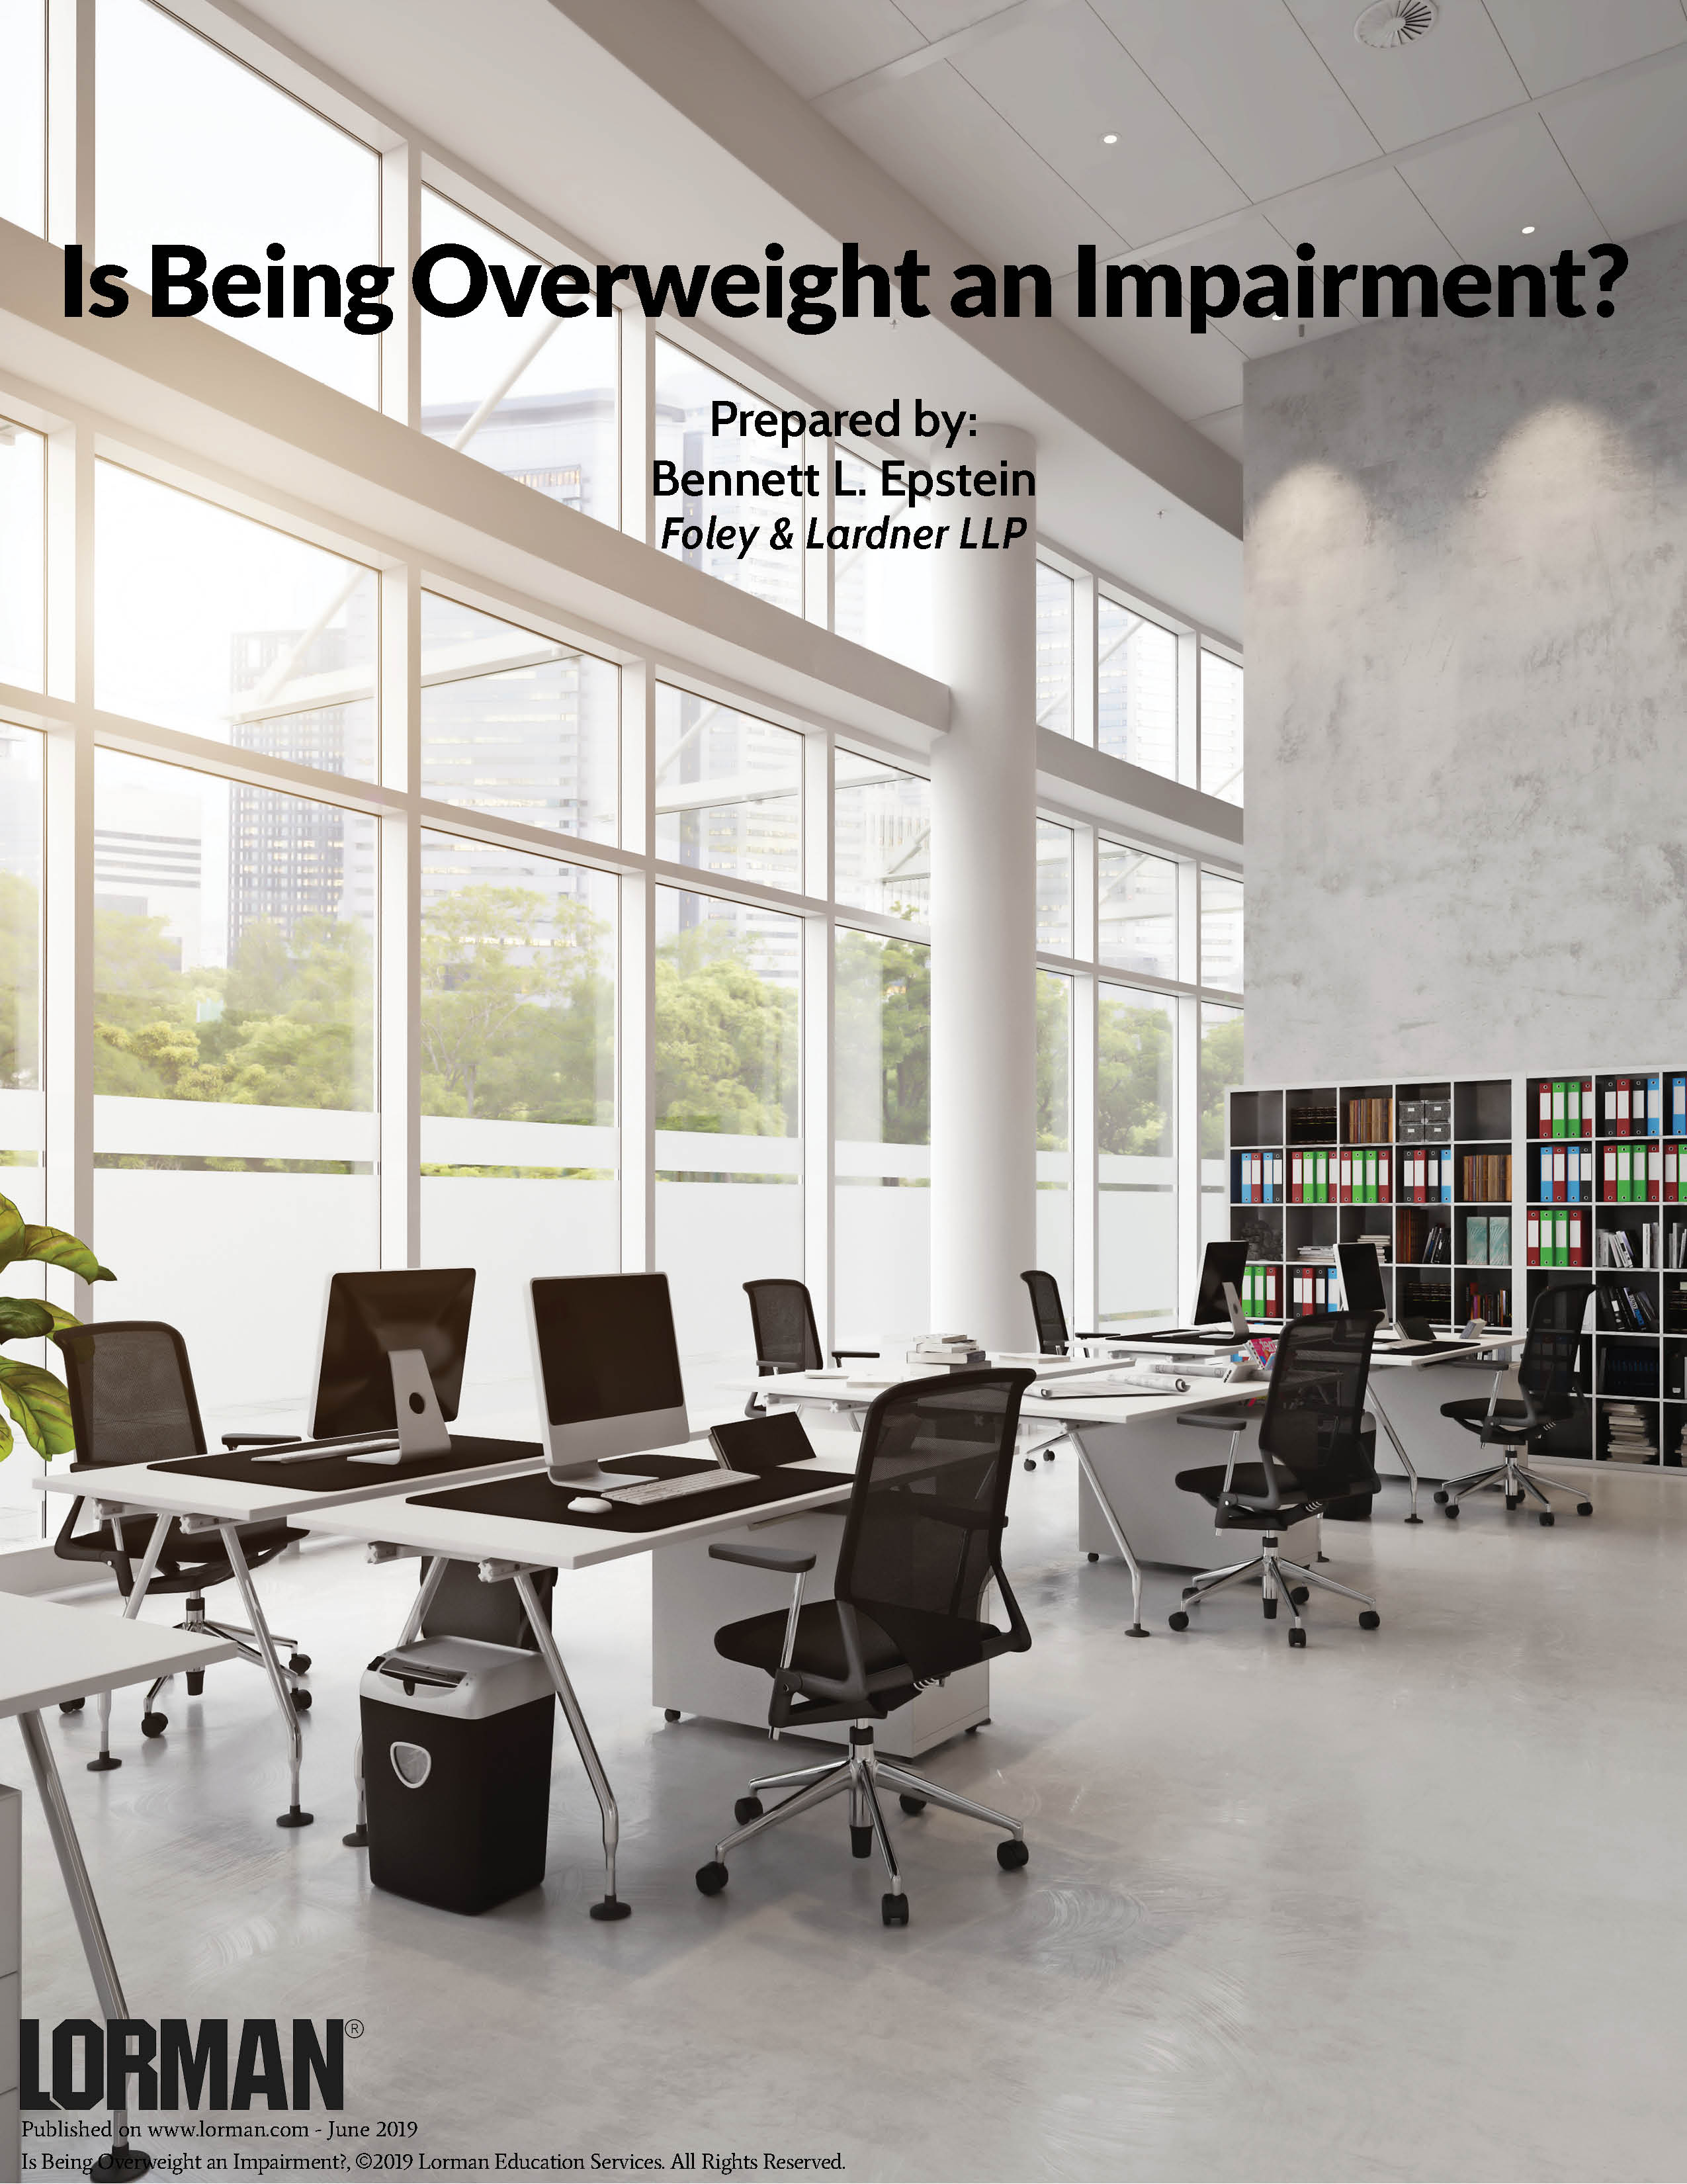 Is Being Overweight an Impairment?